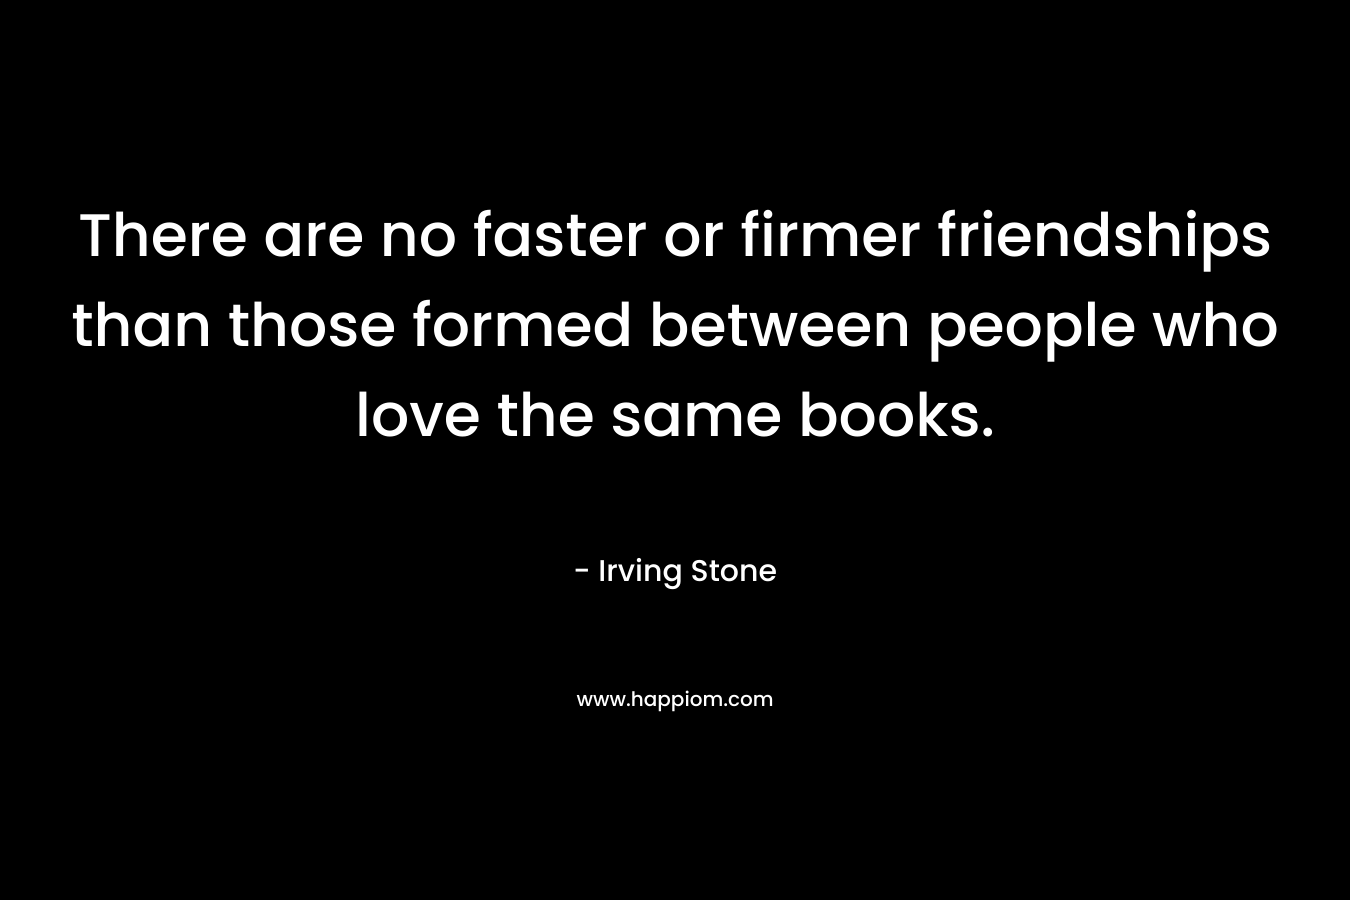 There are no faster or firmer friendships than those formed between people who love the same books. – Irving Stone